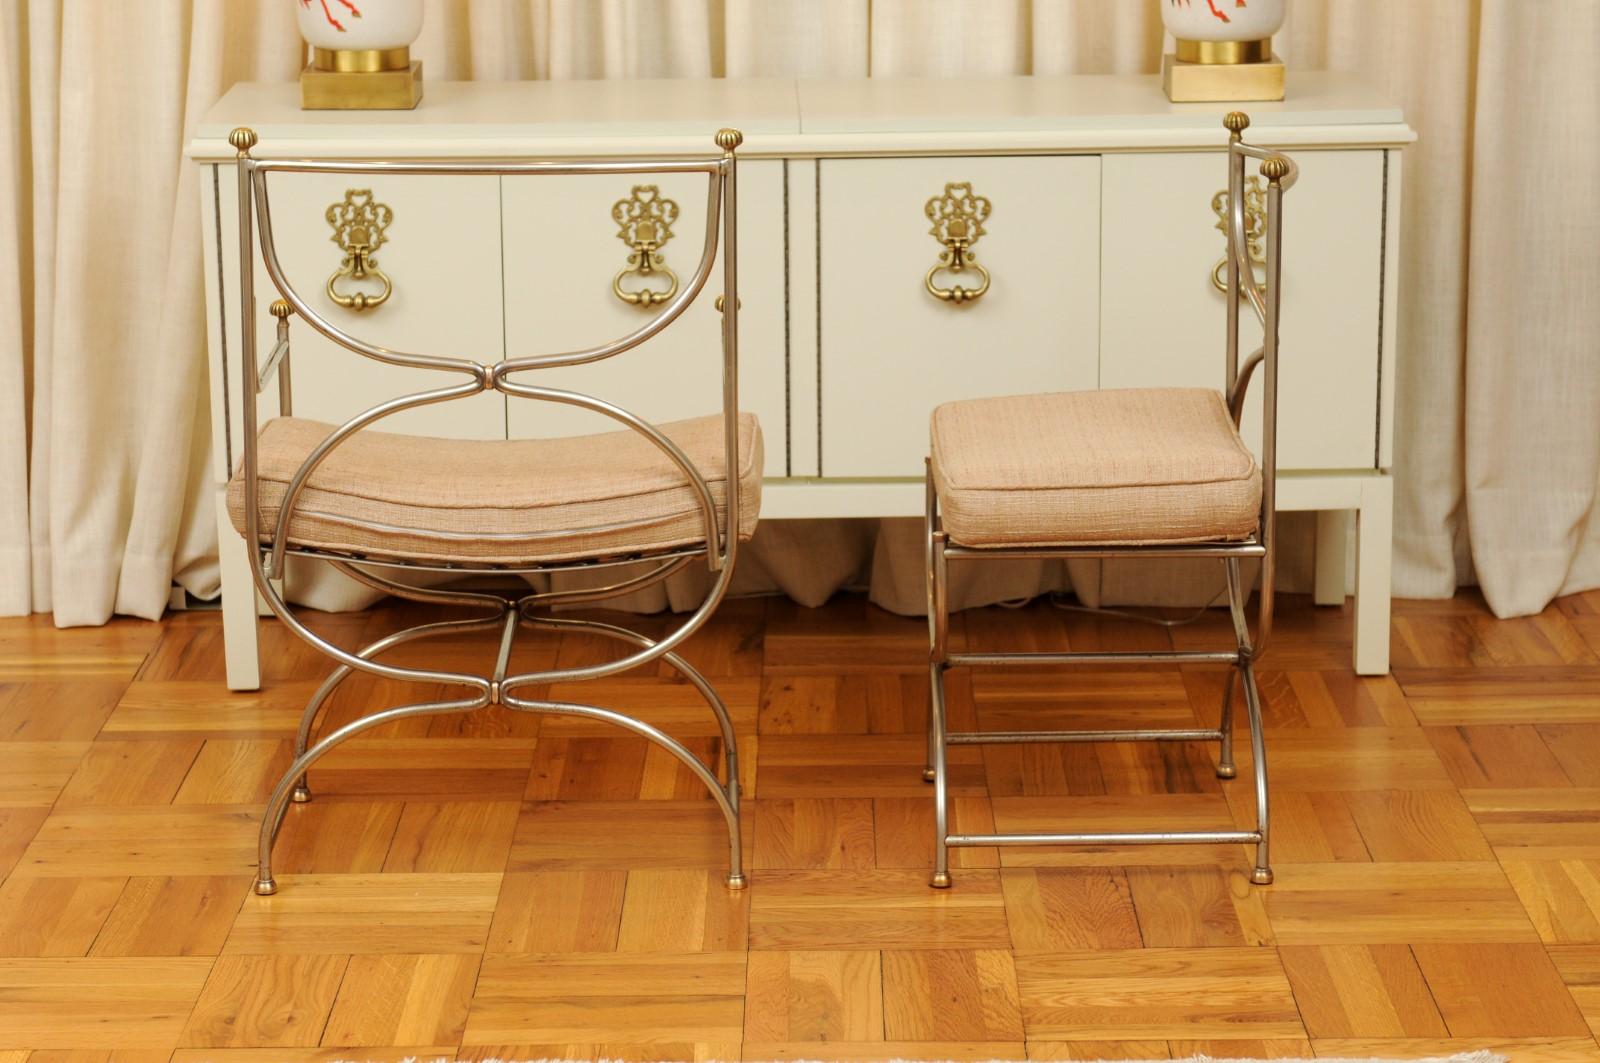 Breathtaking Set of 6 Polished Steel and Brass Chairs by Maison Jansen, 1965 For Sale 6